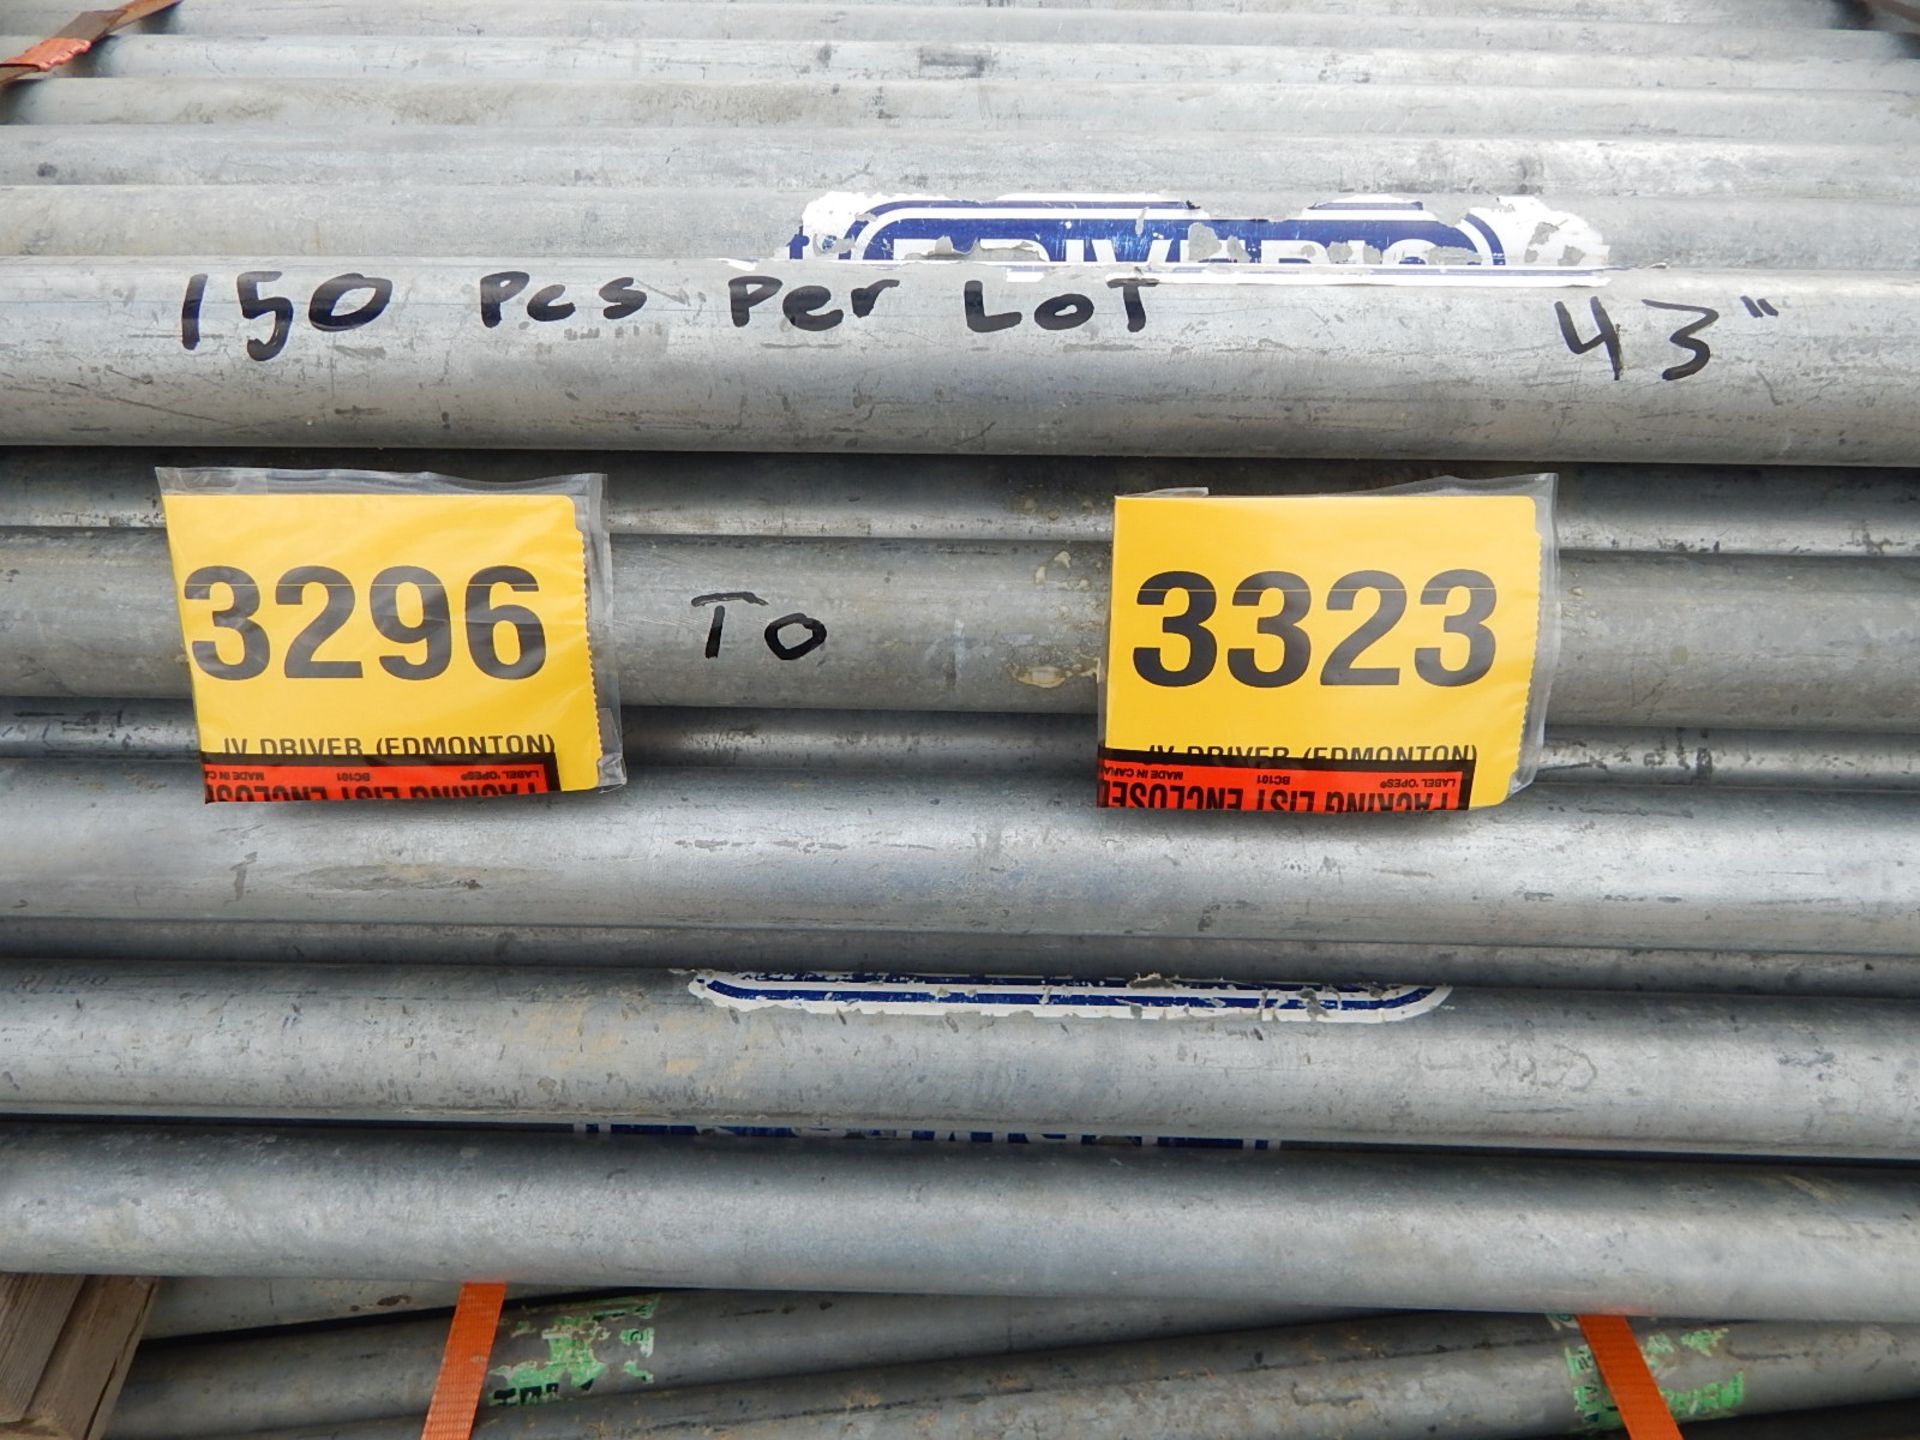 LOT/ 150 PIECES OF 43" SCAFFOLDING LEDGERS (CI) - Image 3 of 3